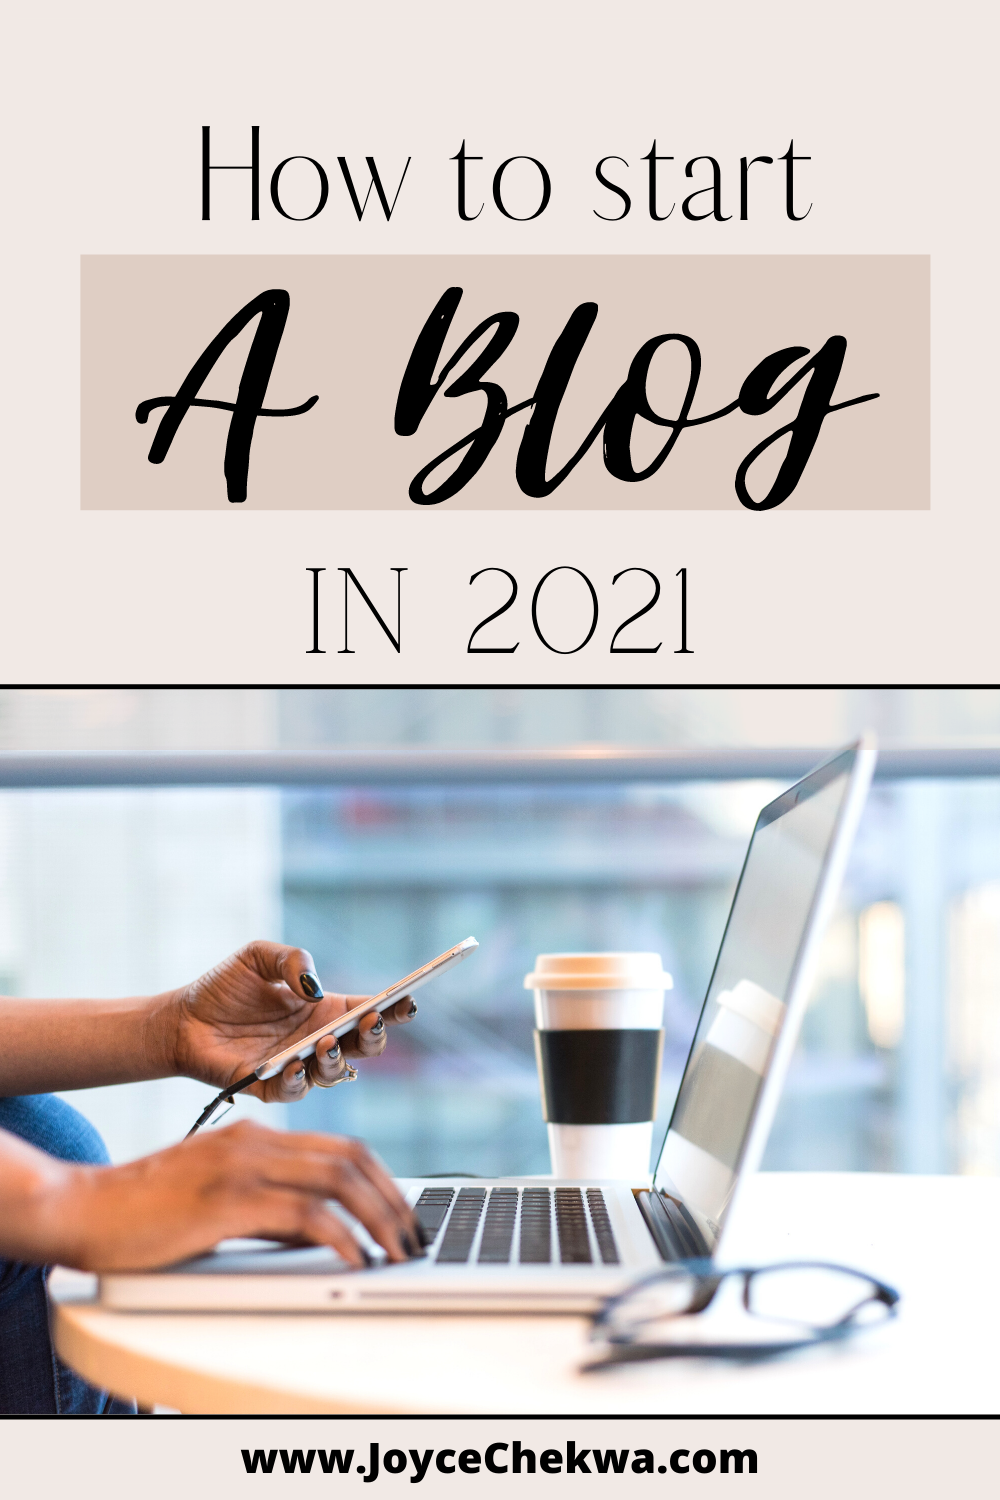 How to start a blog in 2021